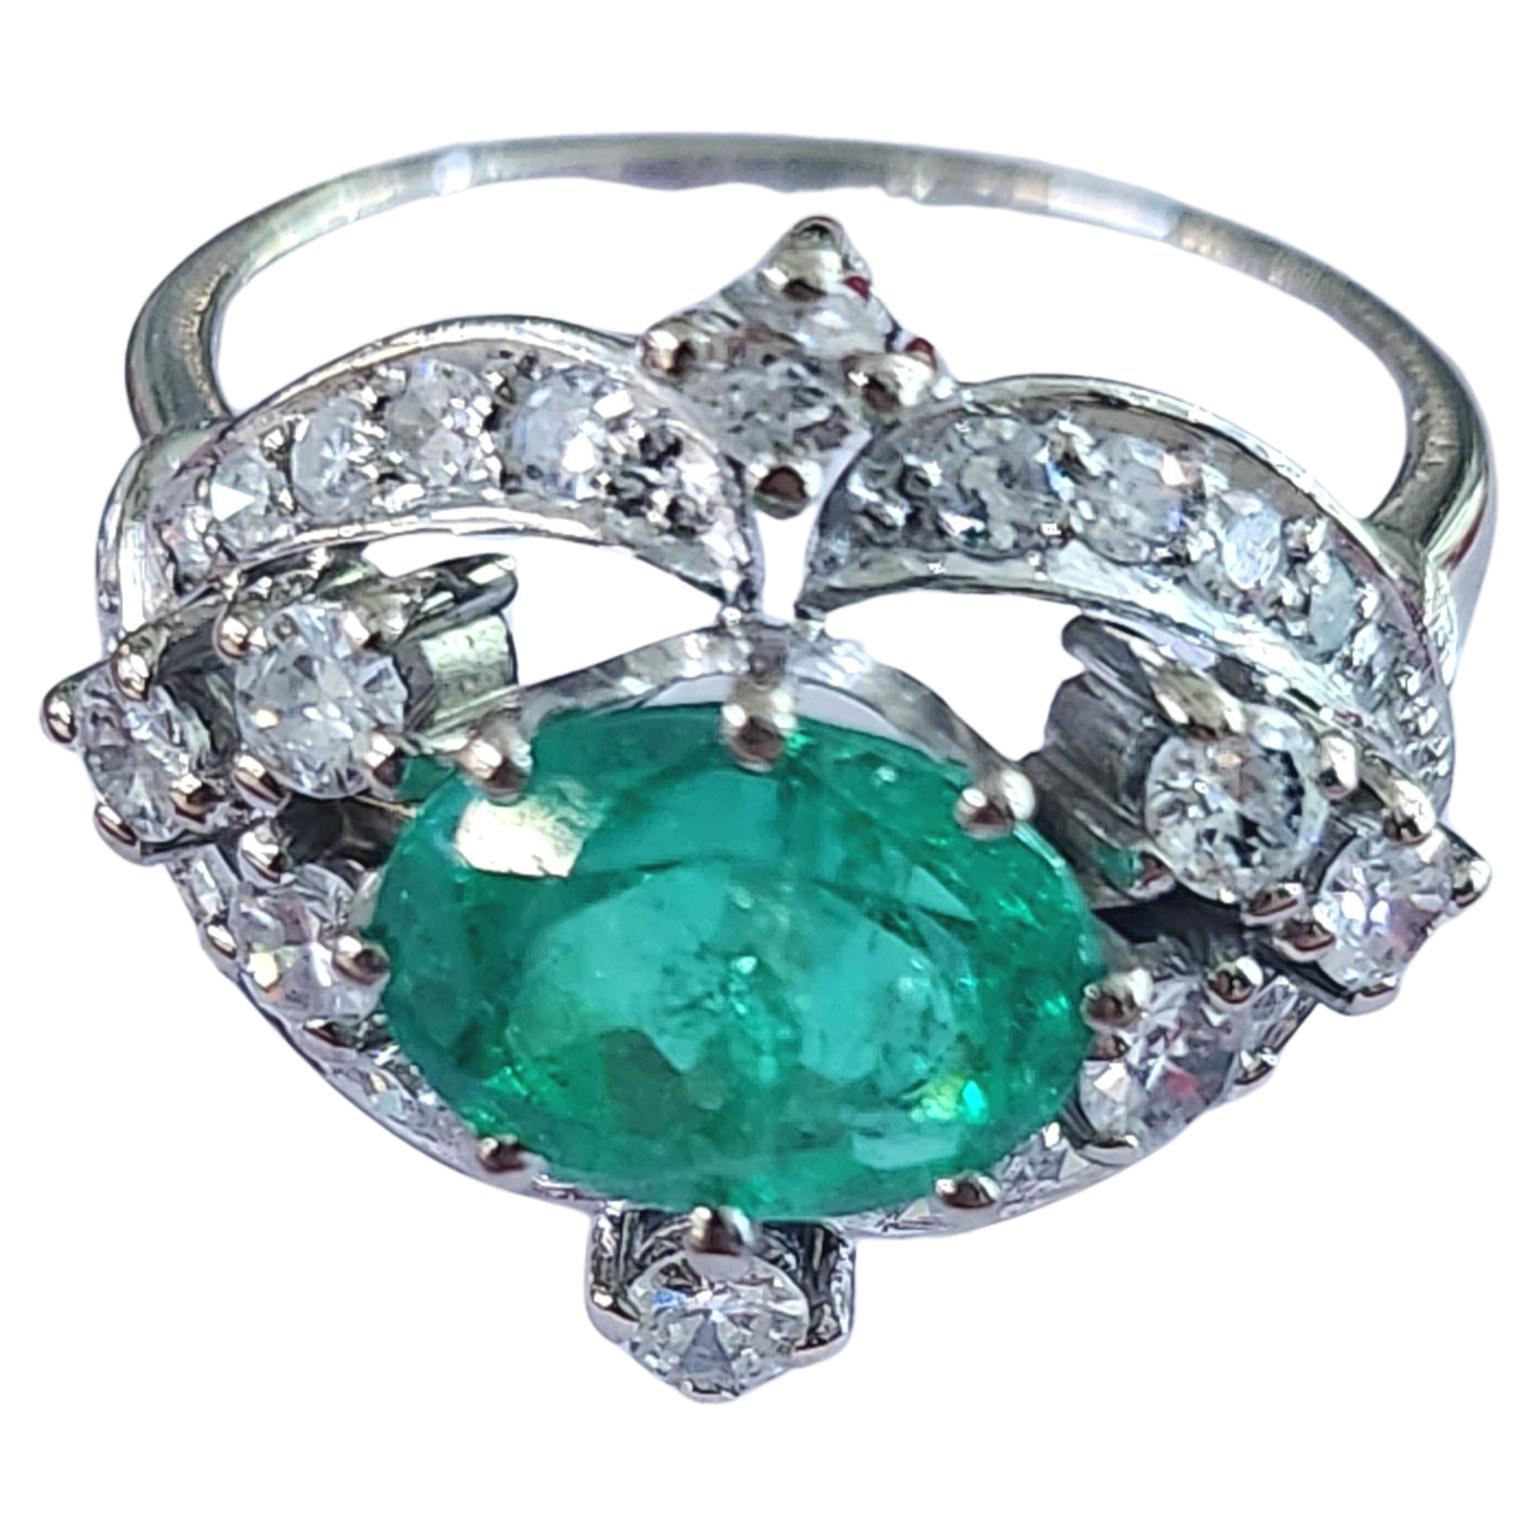 Vintage 18k white gold ring centered with natural green emerald estimate weight of 2 carats colombian green color flanked with brilliant cut diamonds H color white estimate weight 0.60 carats 